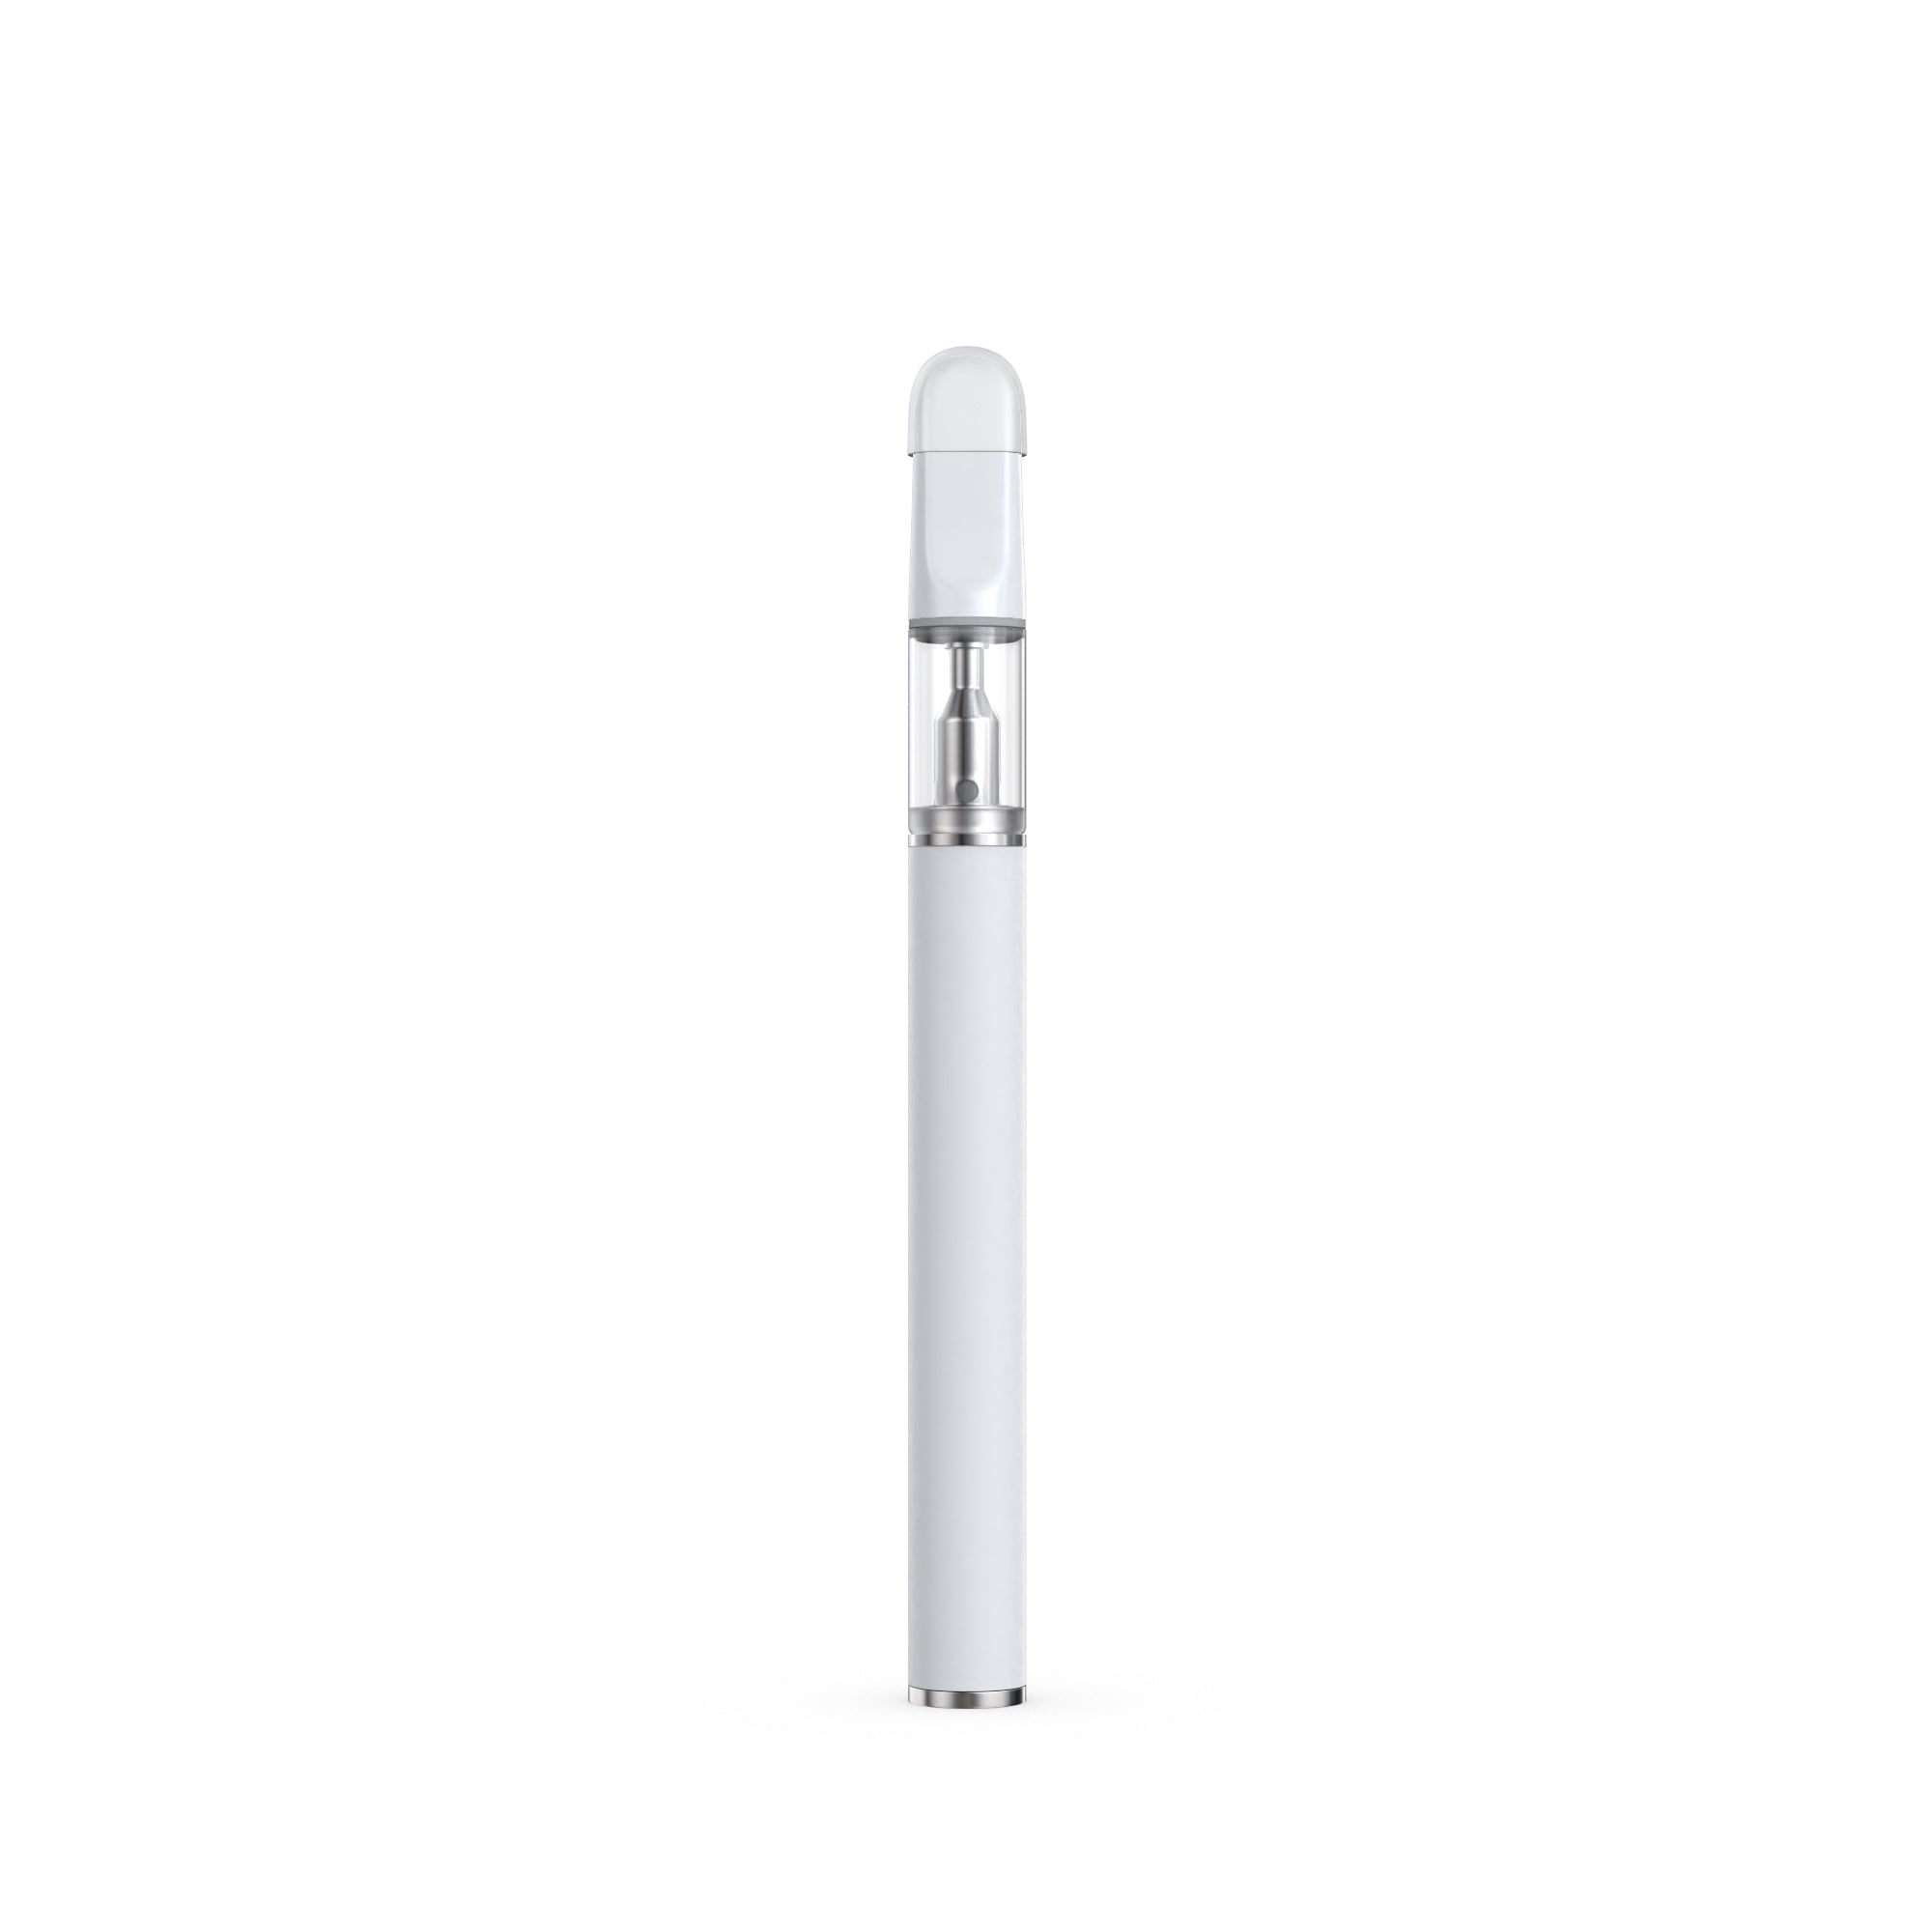 Stainless Steel Disposable Vape Pen 0.5ml (White) with cap